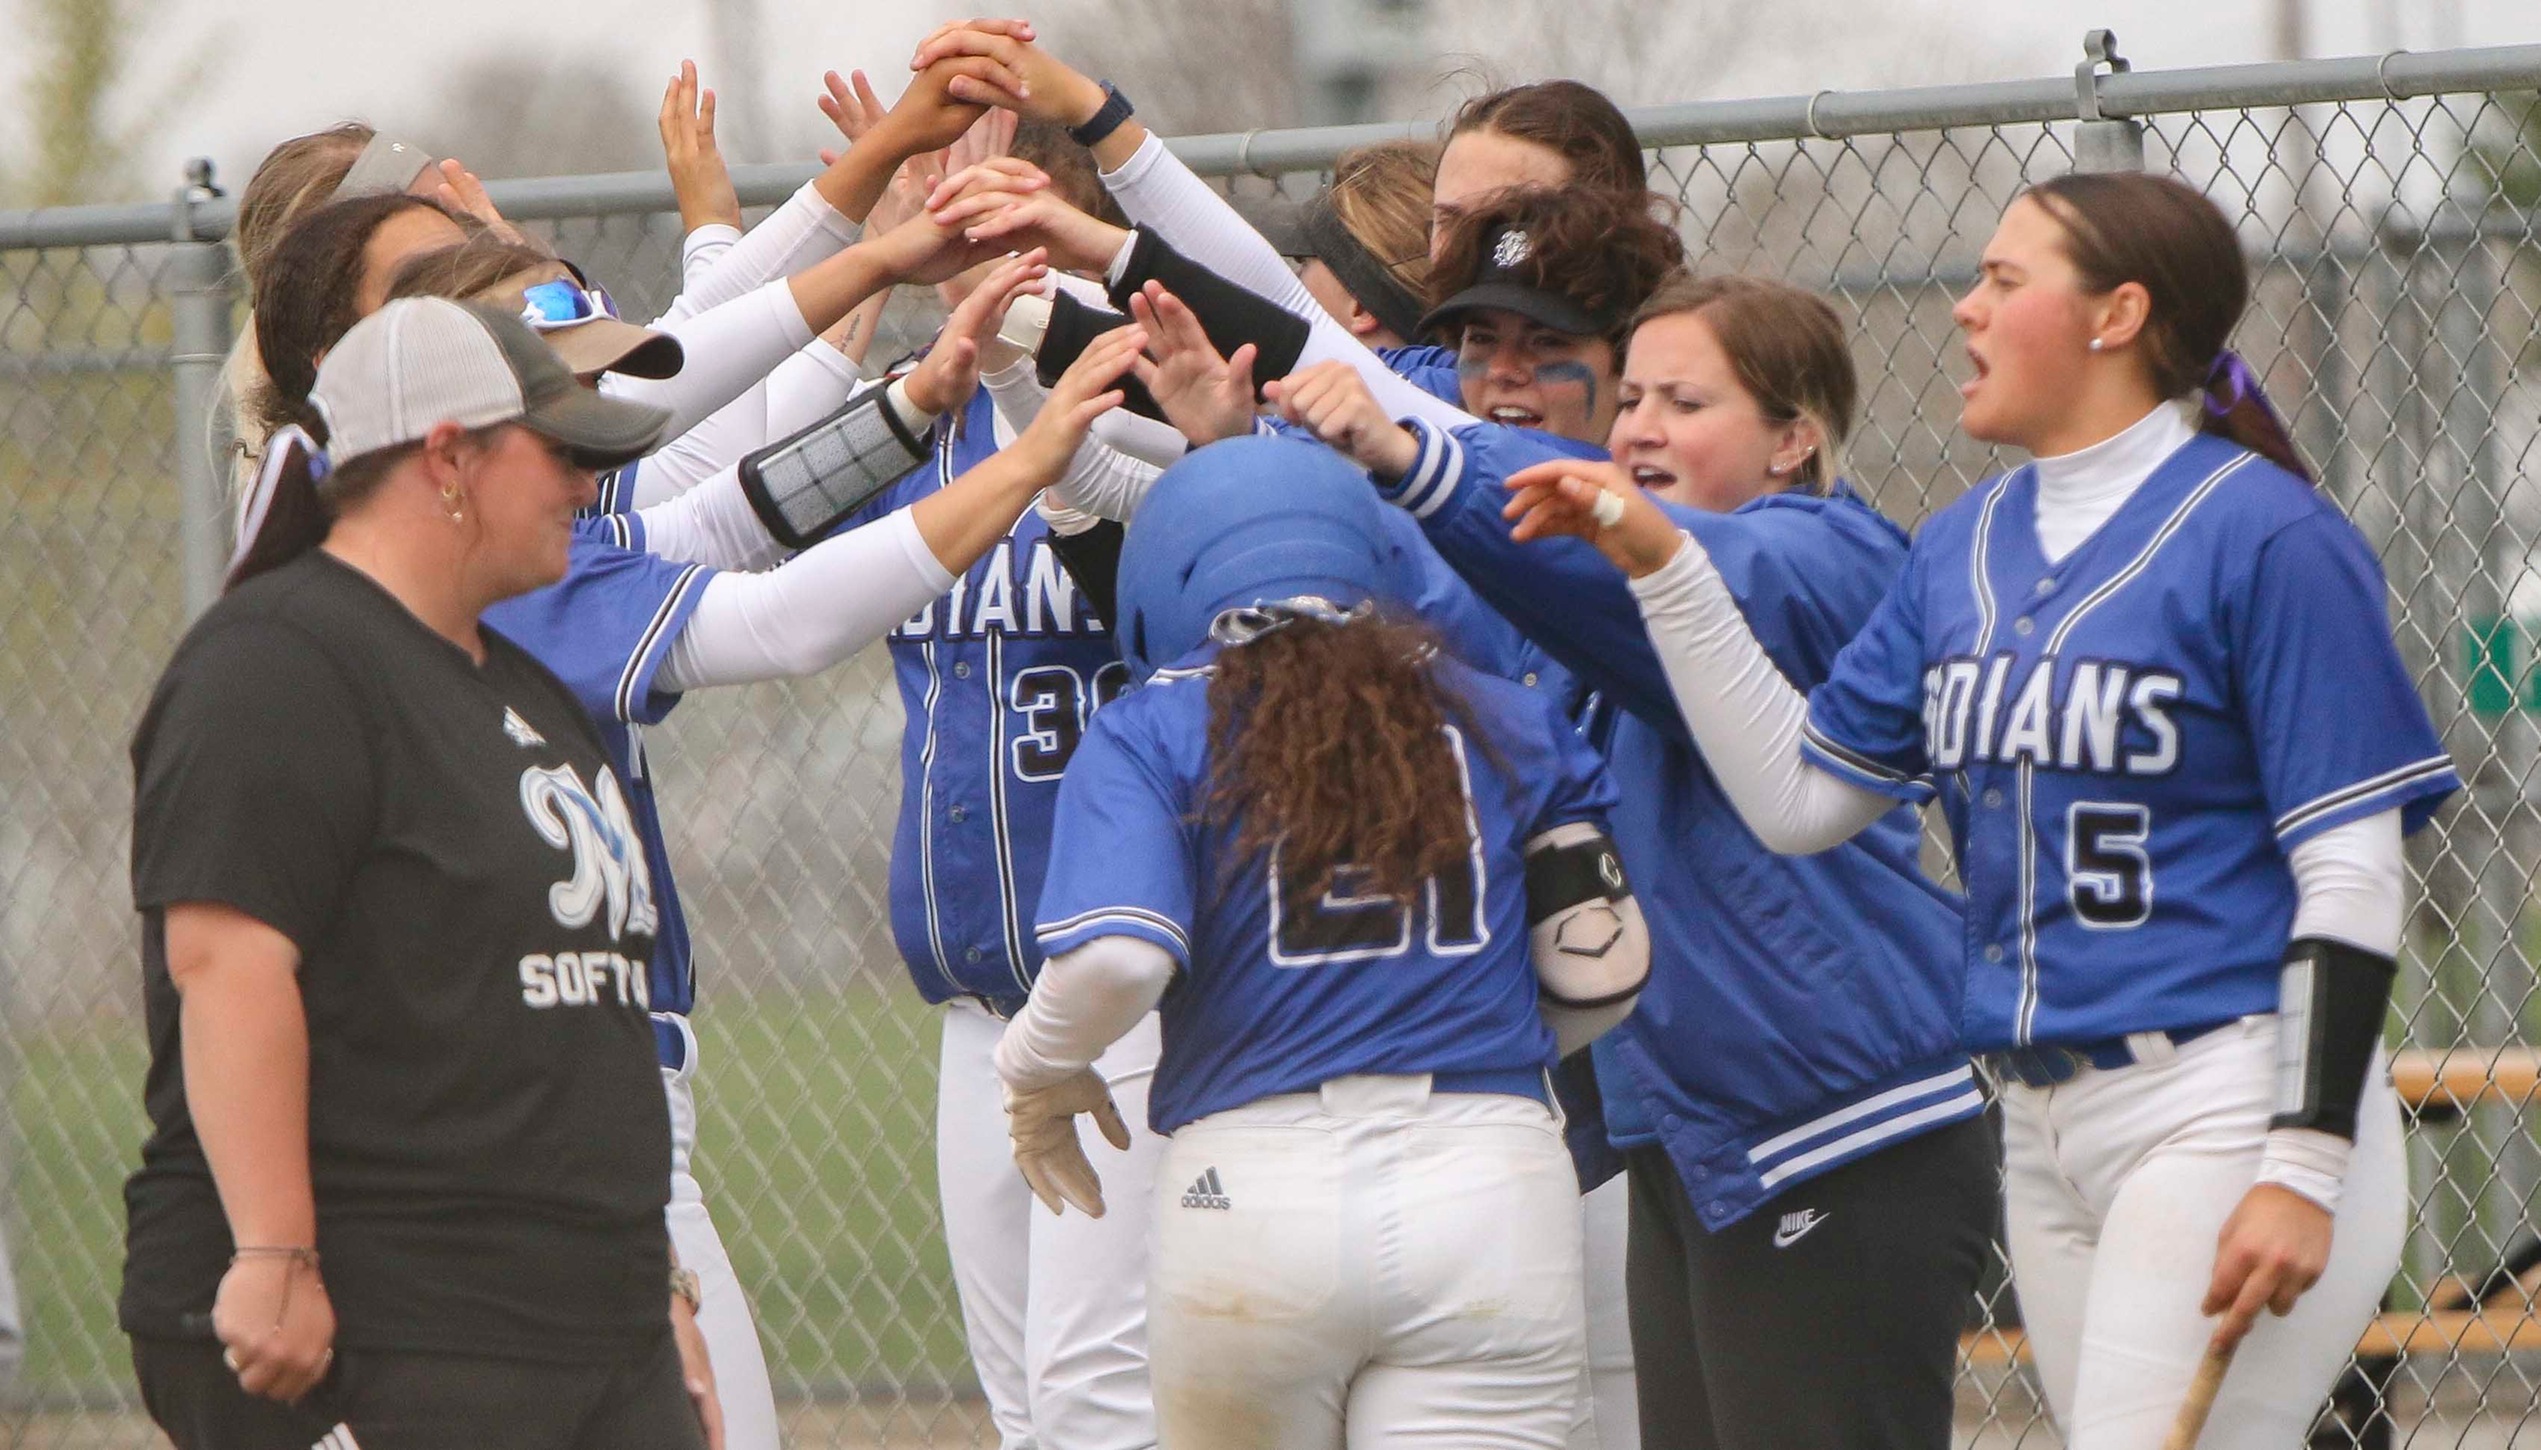 MCC Softball splits Friday doubleheader with Cougars